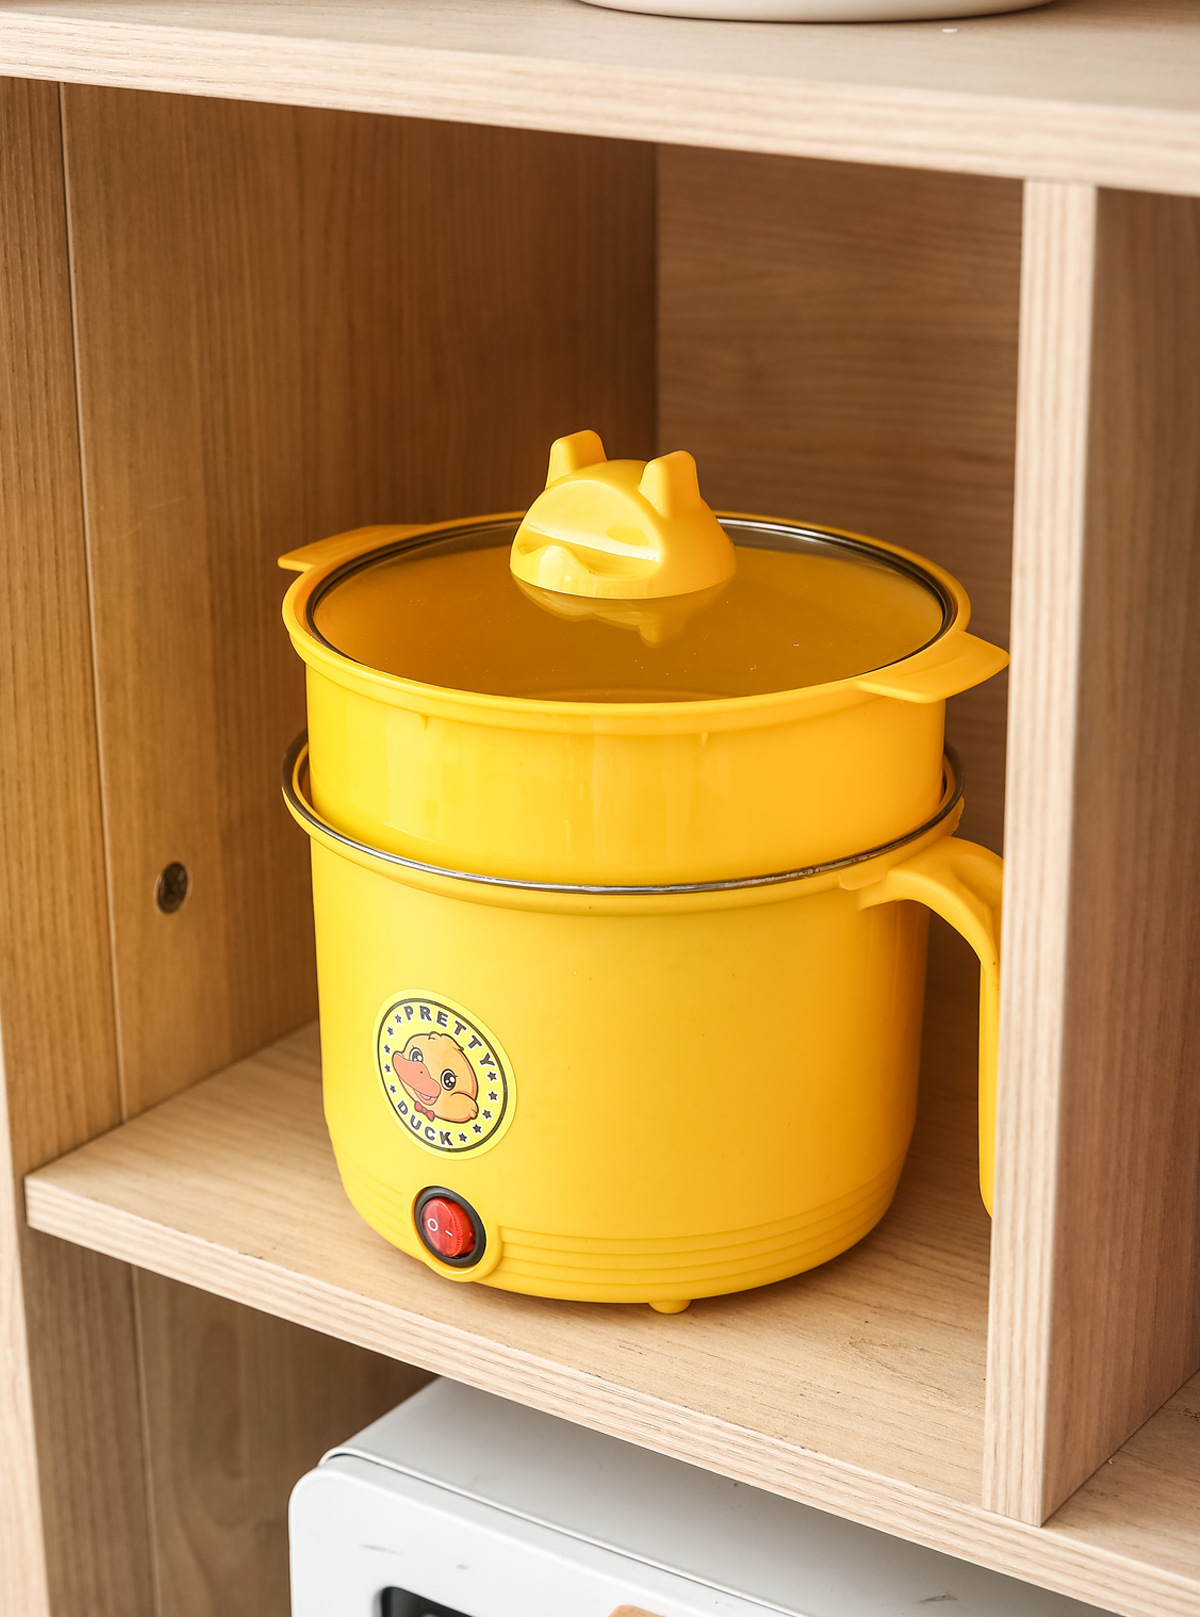 Multi-Functional Student Pot Small Dormitory Electric Food Warmer Small Yellow Duck Electric Caldron Stainless Steel Cooking Integrated Non-Stick Pan